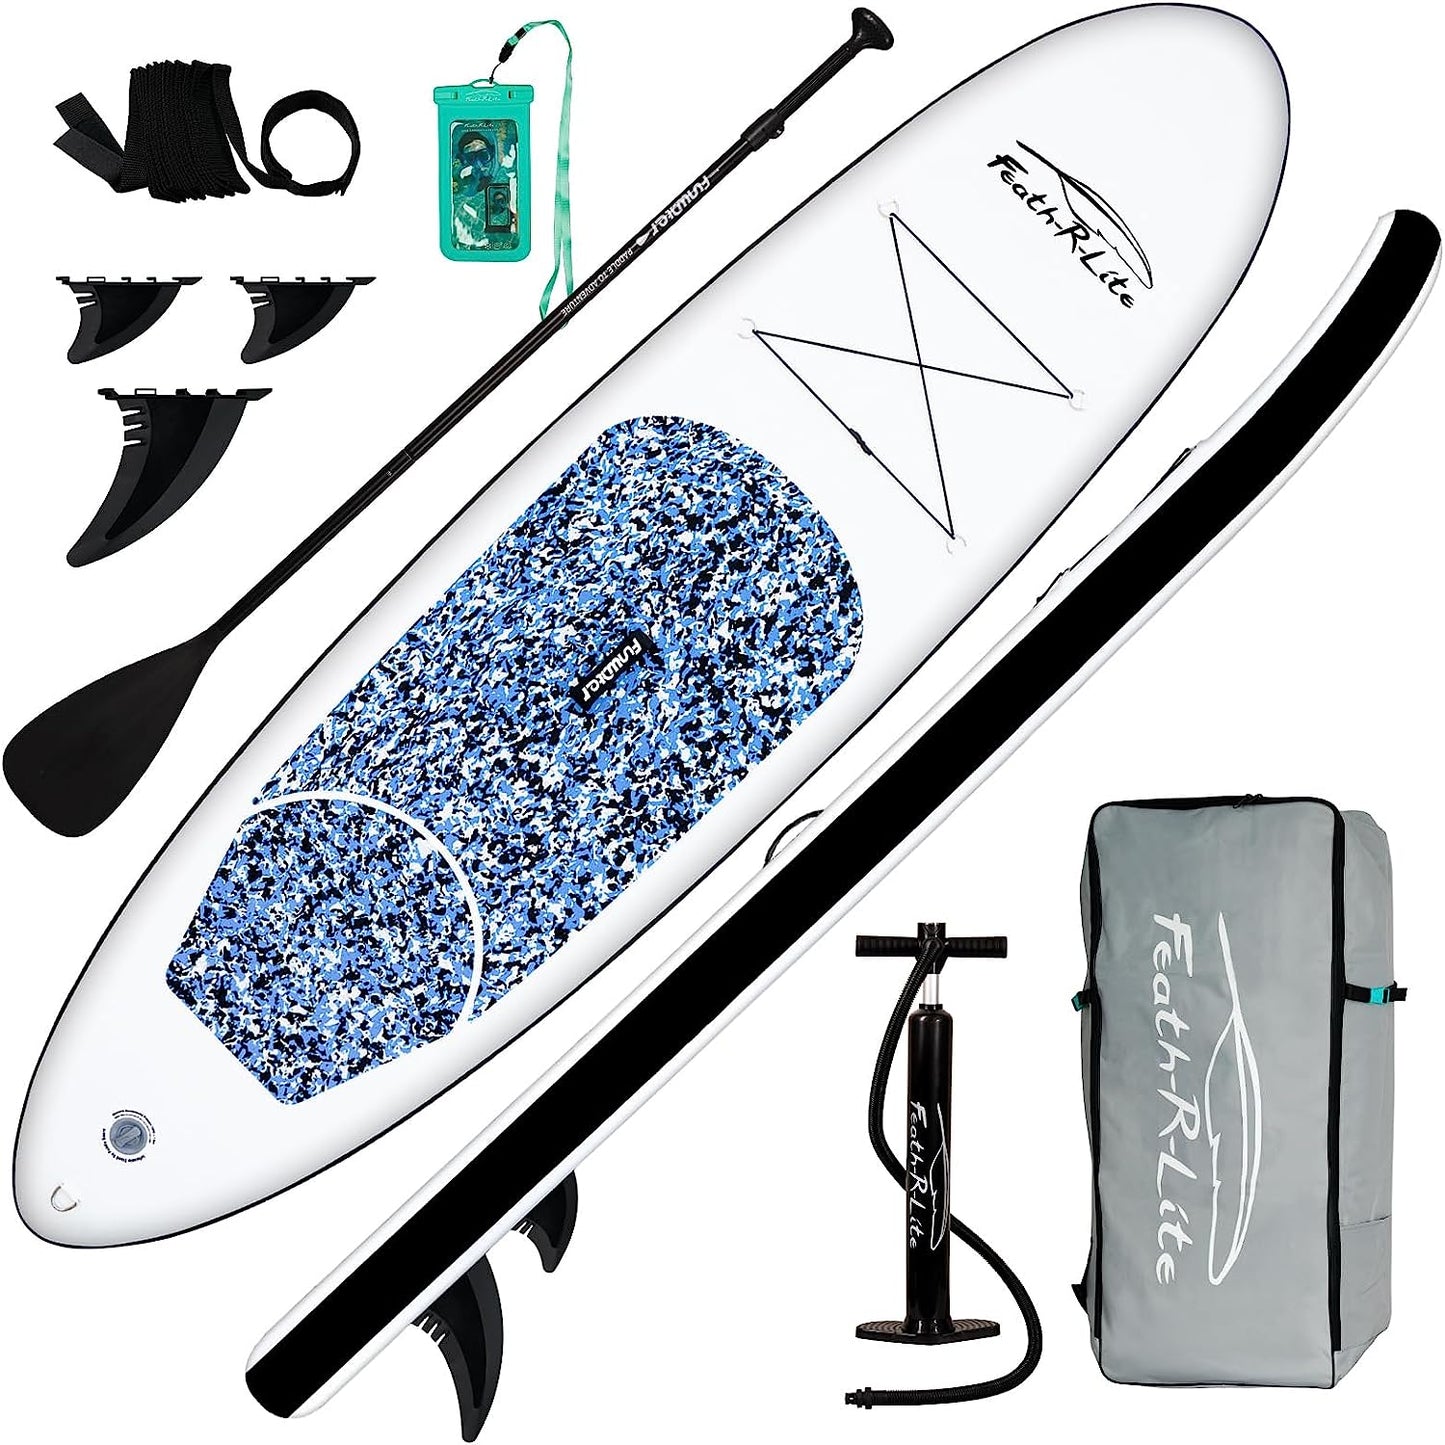  10'X30''X6'' Ultra-Light Inflatable Stand up Paddle Board with Complete Accessories Set: Paddleboard, Three Fins, Adjustable Paddle, Pump, Backpack, Leash, and Waterproof Phone Bag